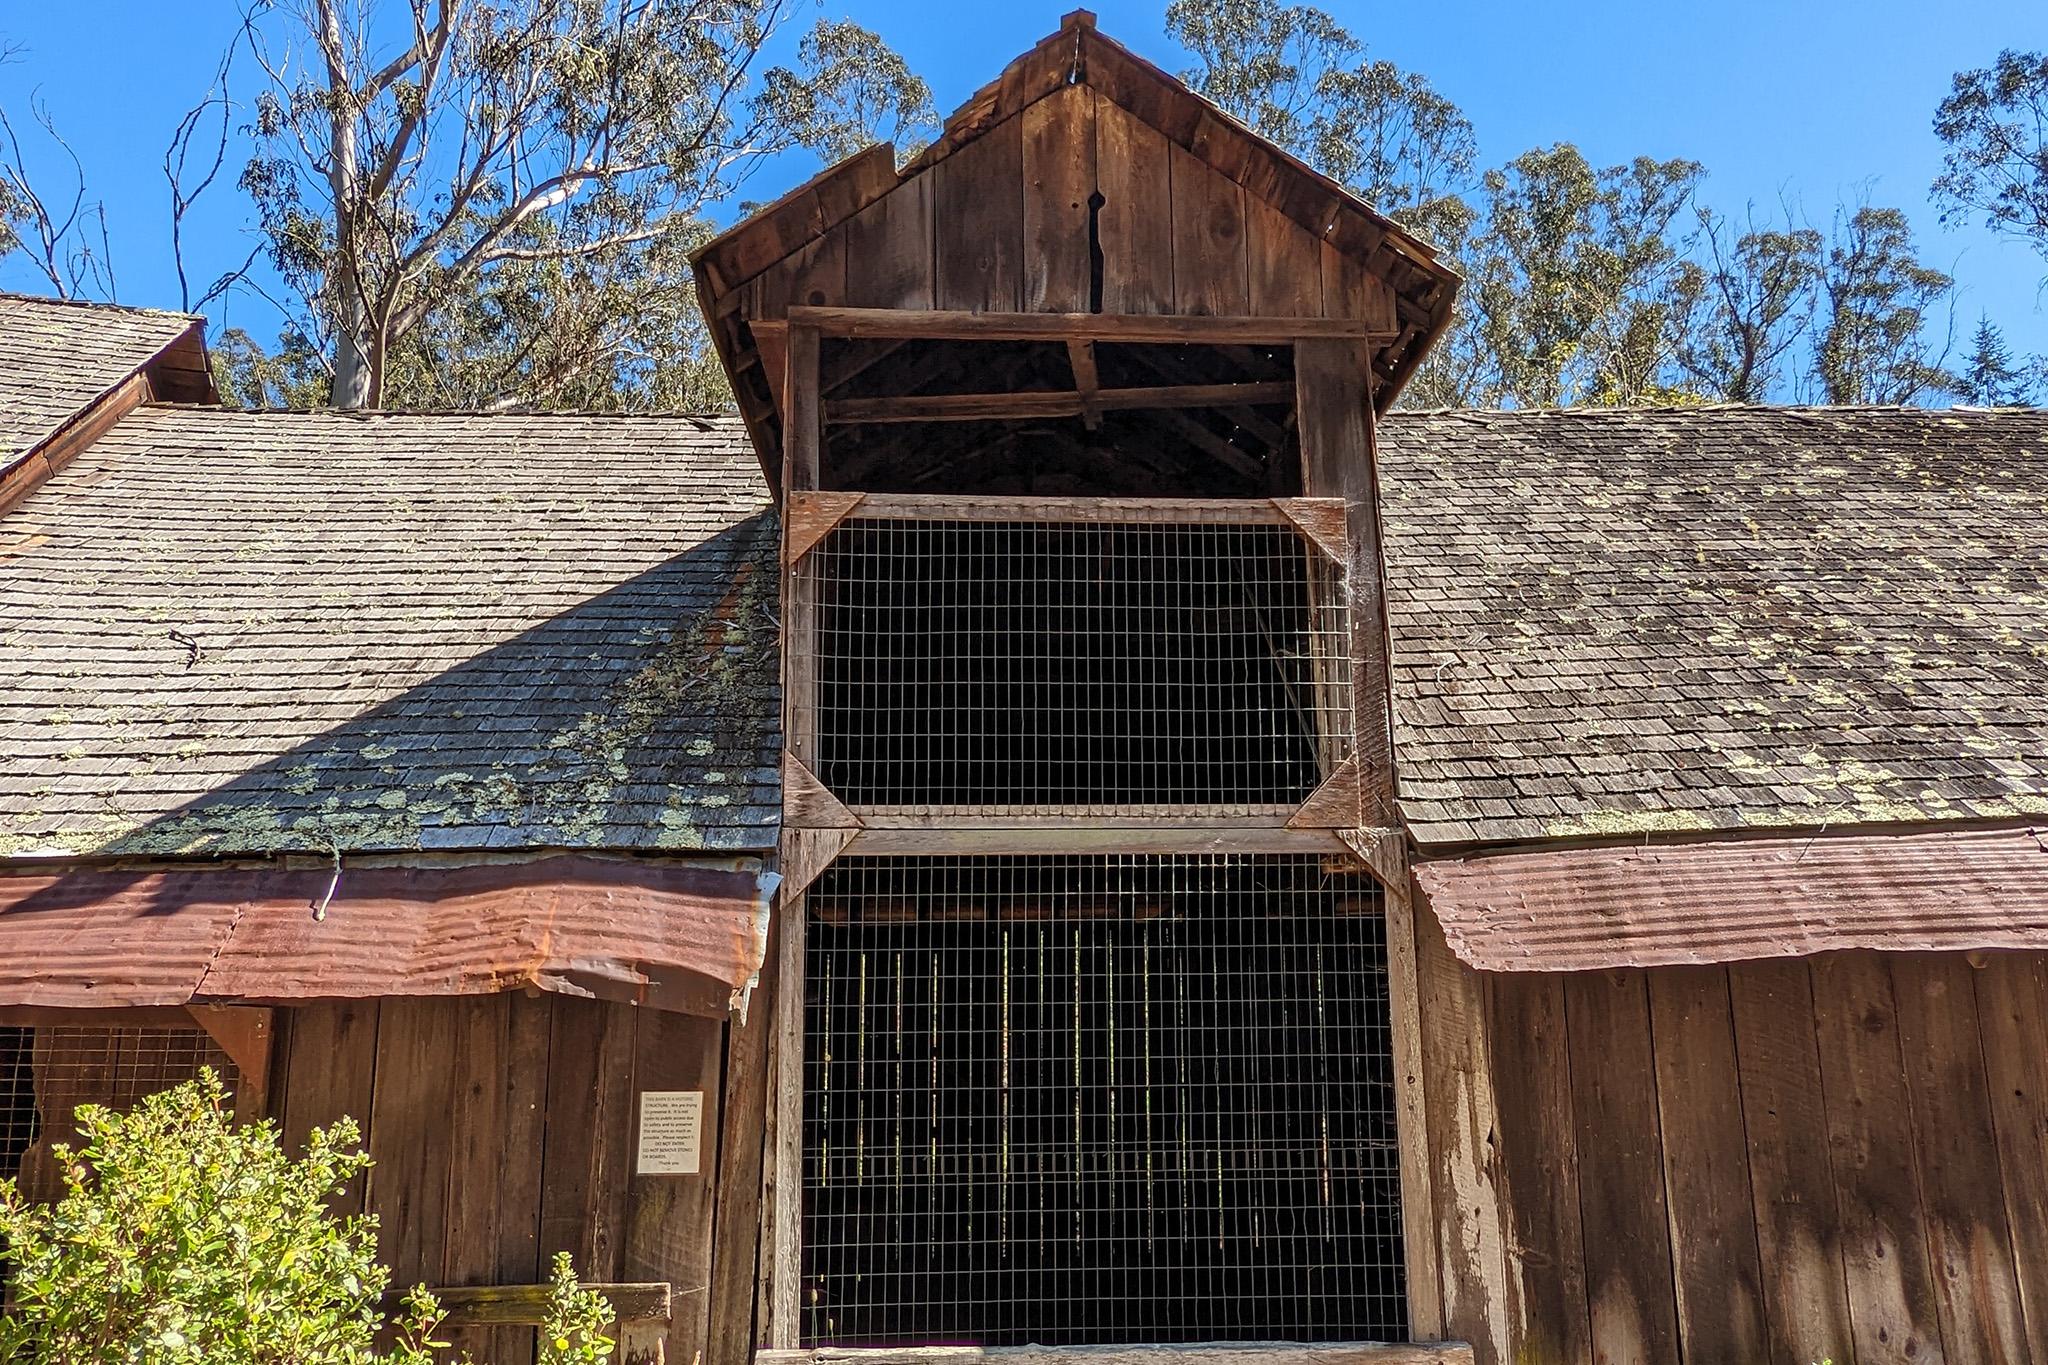 A Calif. parks program led me to Bay Area's Murray Ranch barn